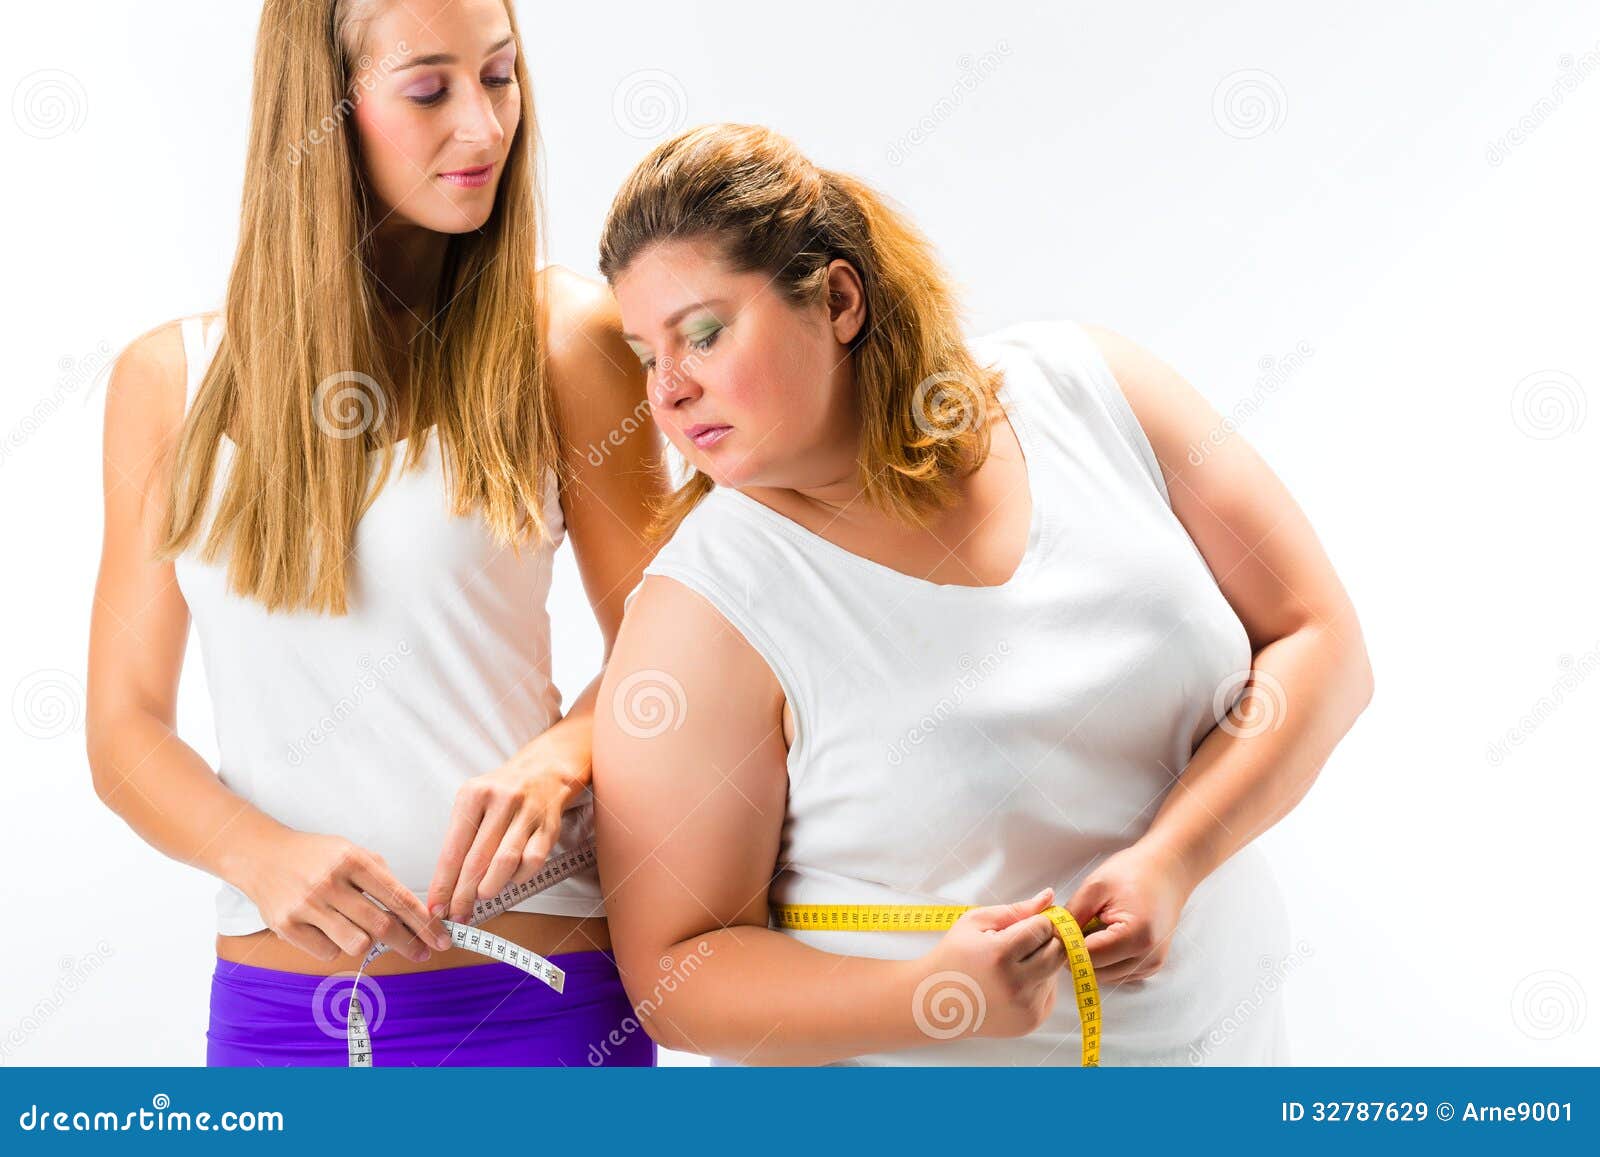 thin and fat woman measuring waist with tape